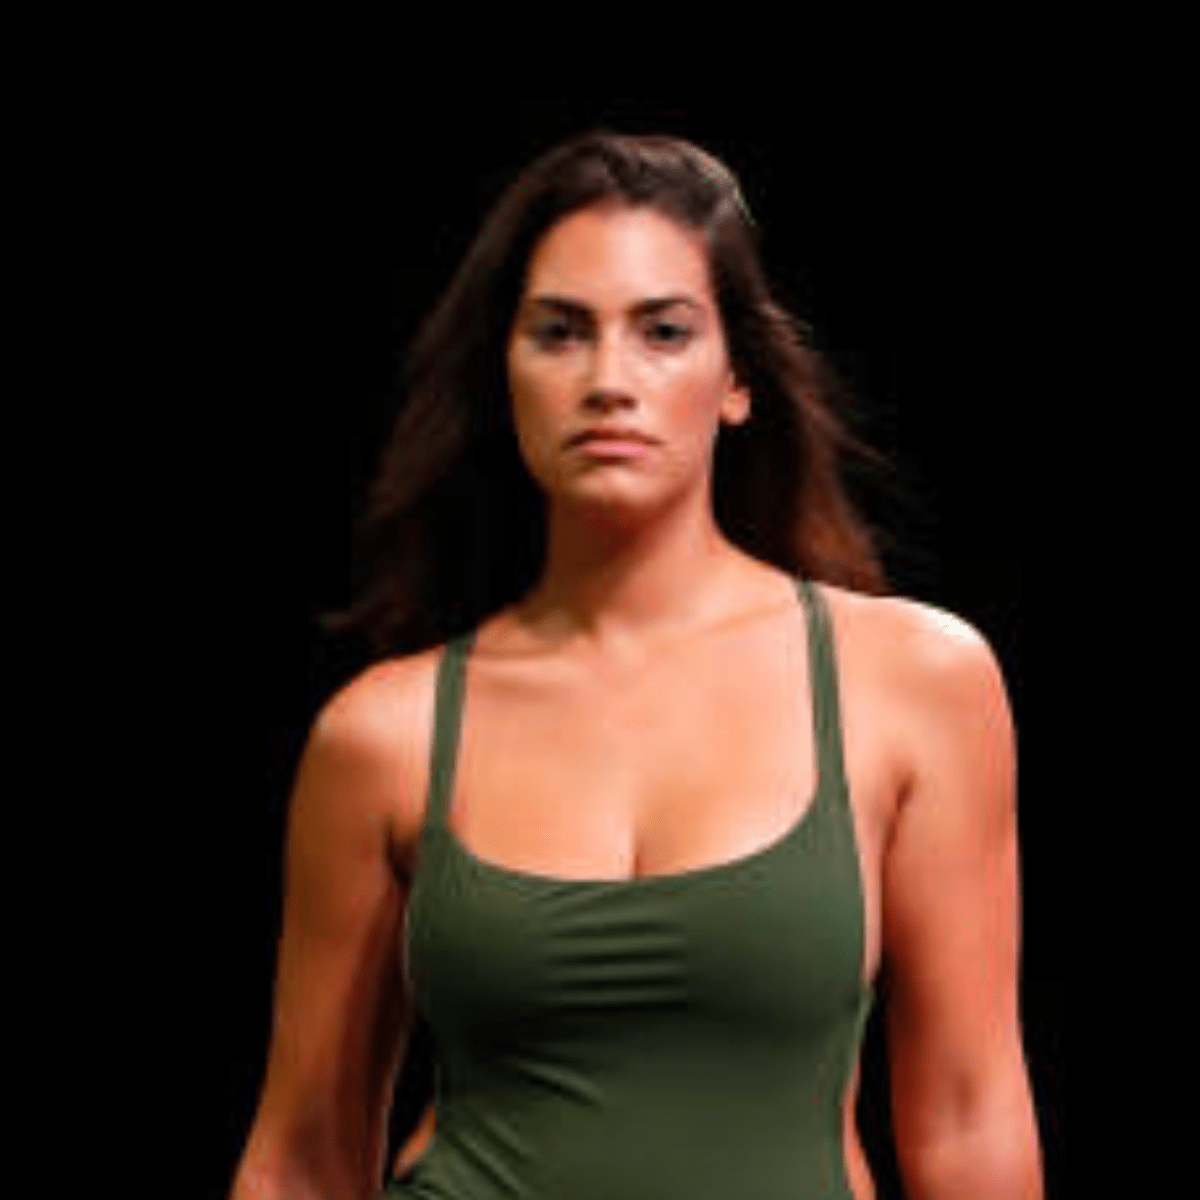 SI Swimsuit model challenges Victoria's Secret in provocative